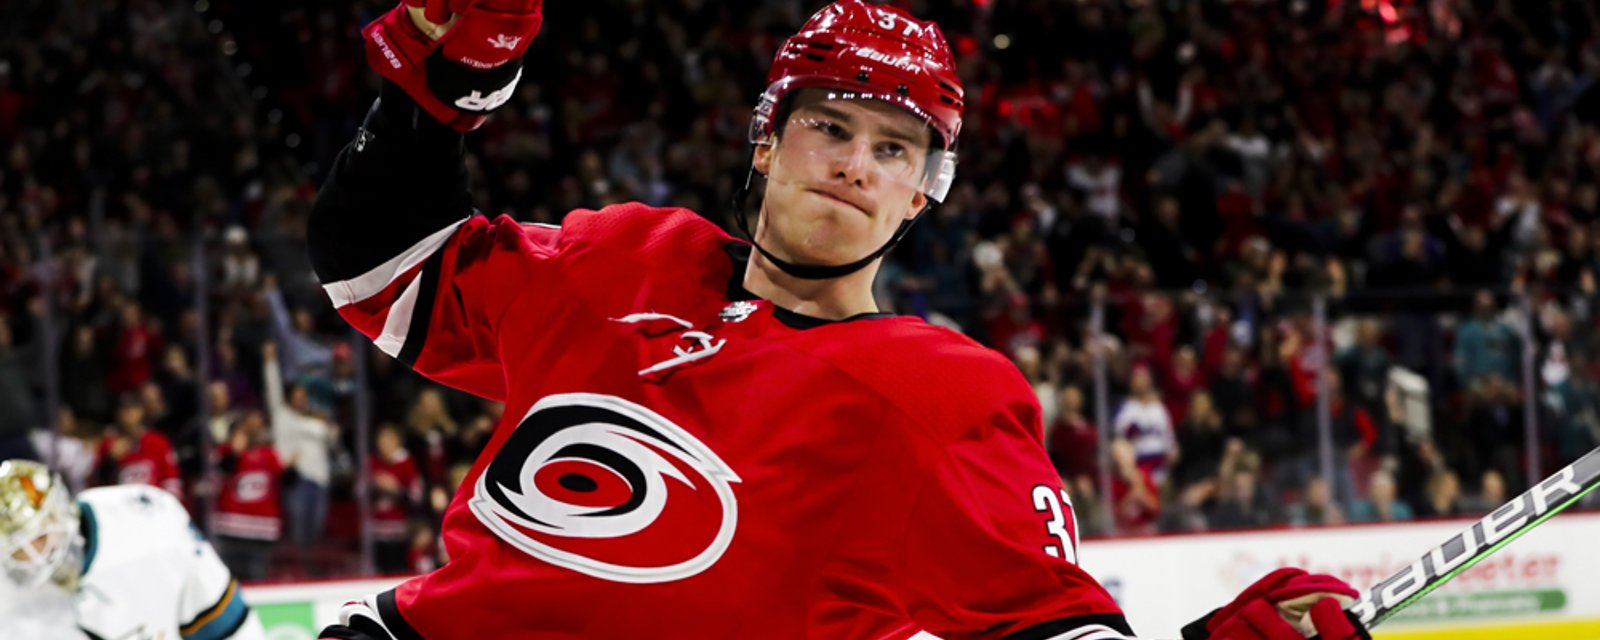 Svechnikov signs a monster eight year contract with the Hurricanes